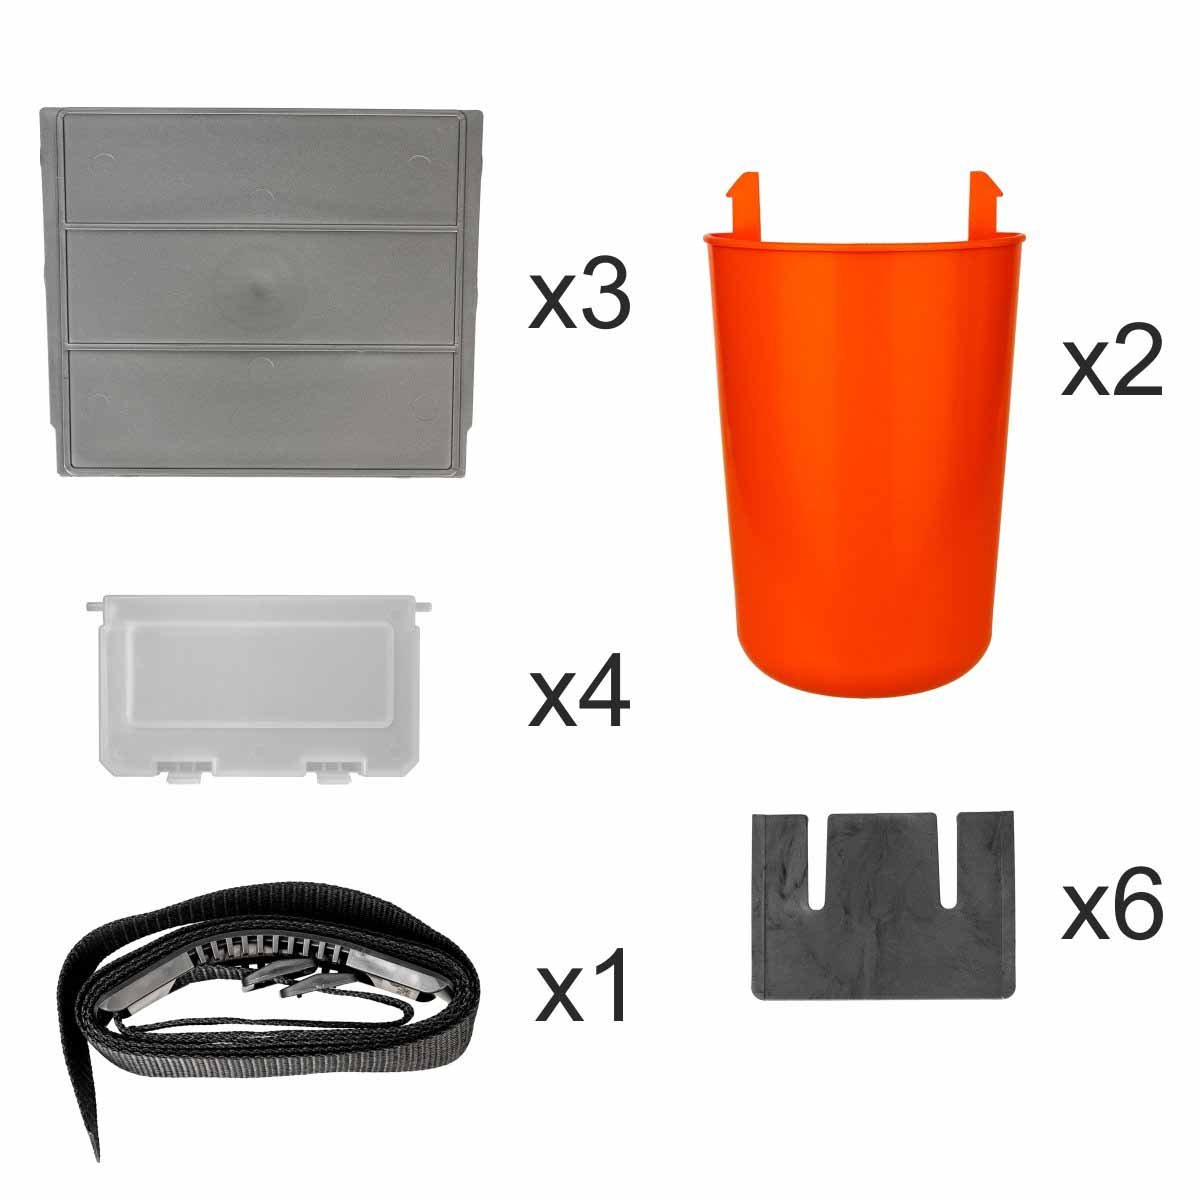 FishBox Large 5 gal Box for Ice Fishing is equipped with 3 big plastic dividers, 6 small plastic dividers, 4 plastic lids, 2 side pockets and 1 adjustable shoulder strap